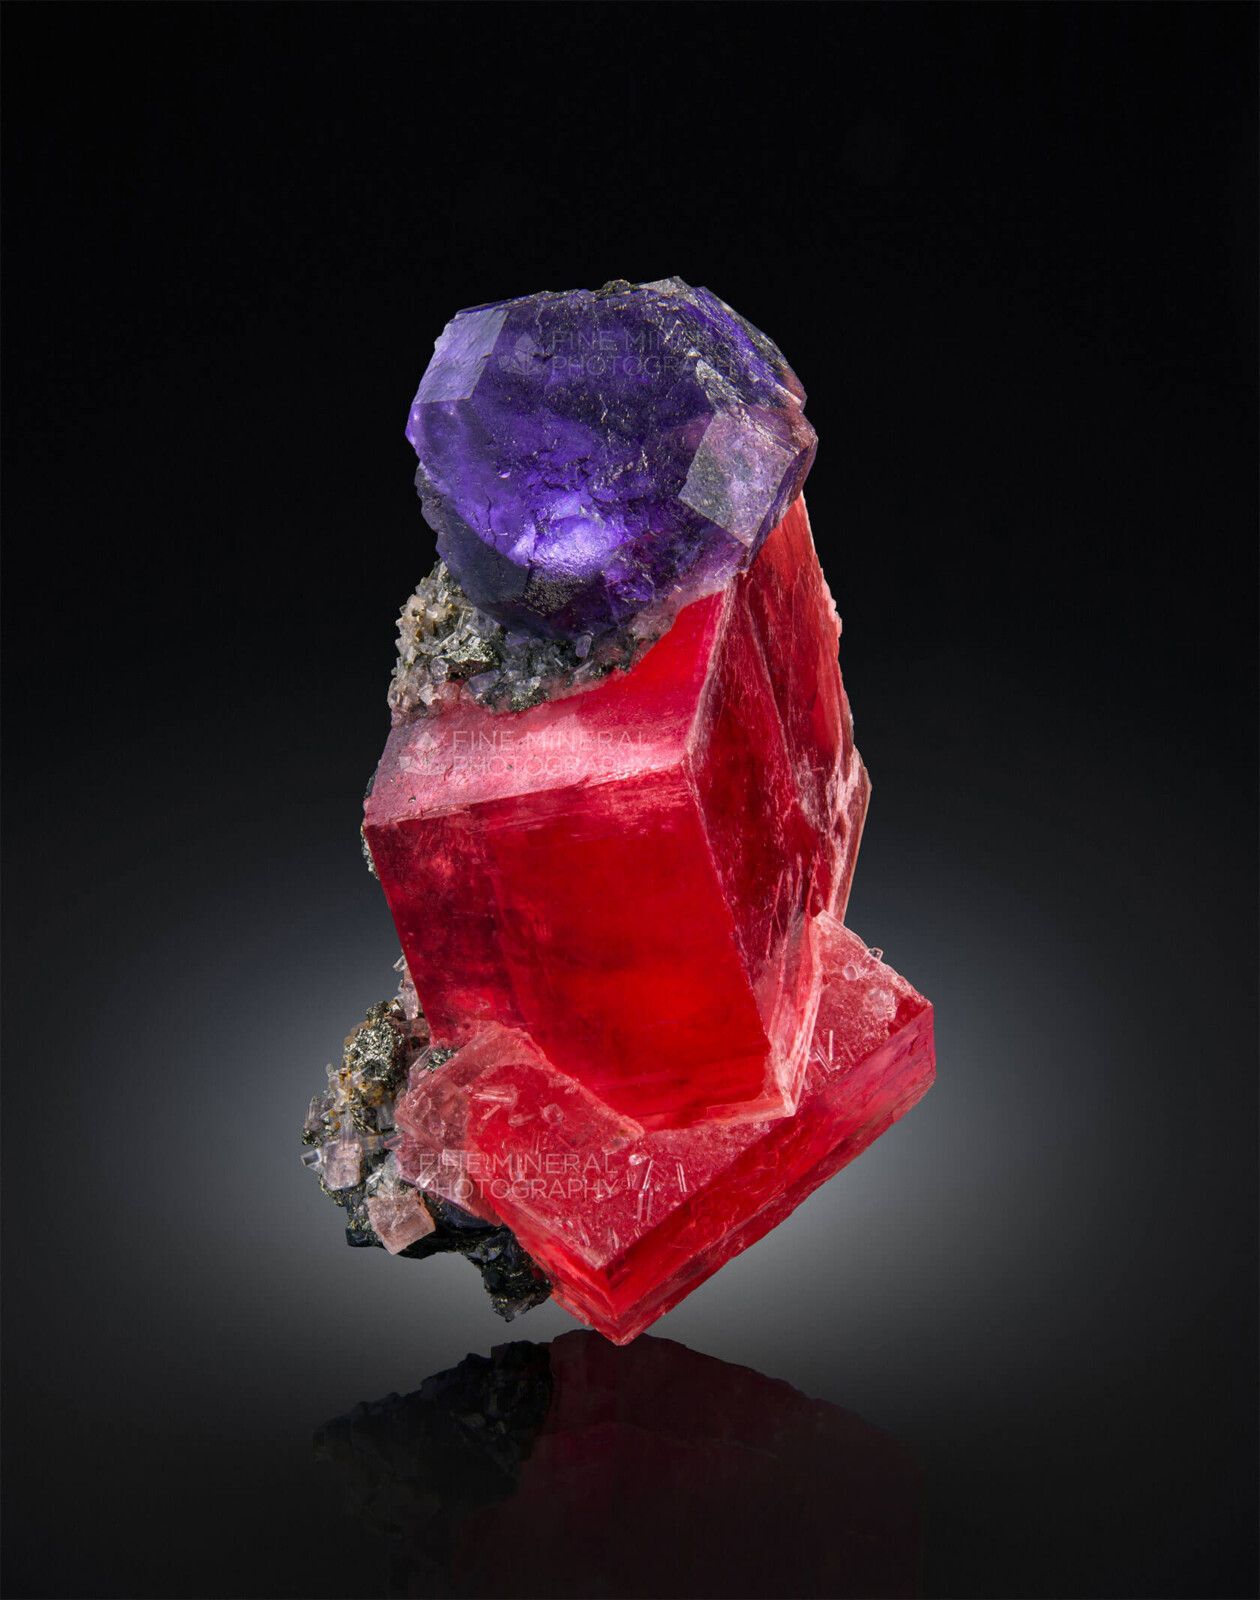 The Magnificent Mineral Photography Of Laszlo Kupi (20)